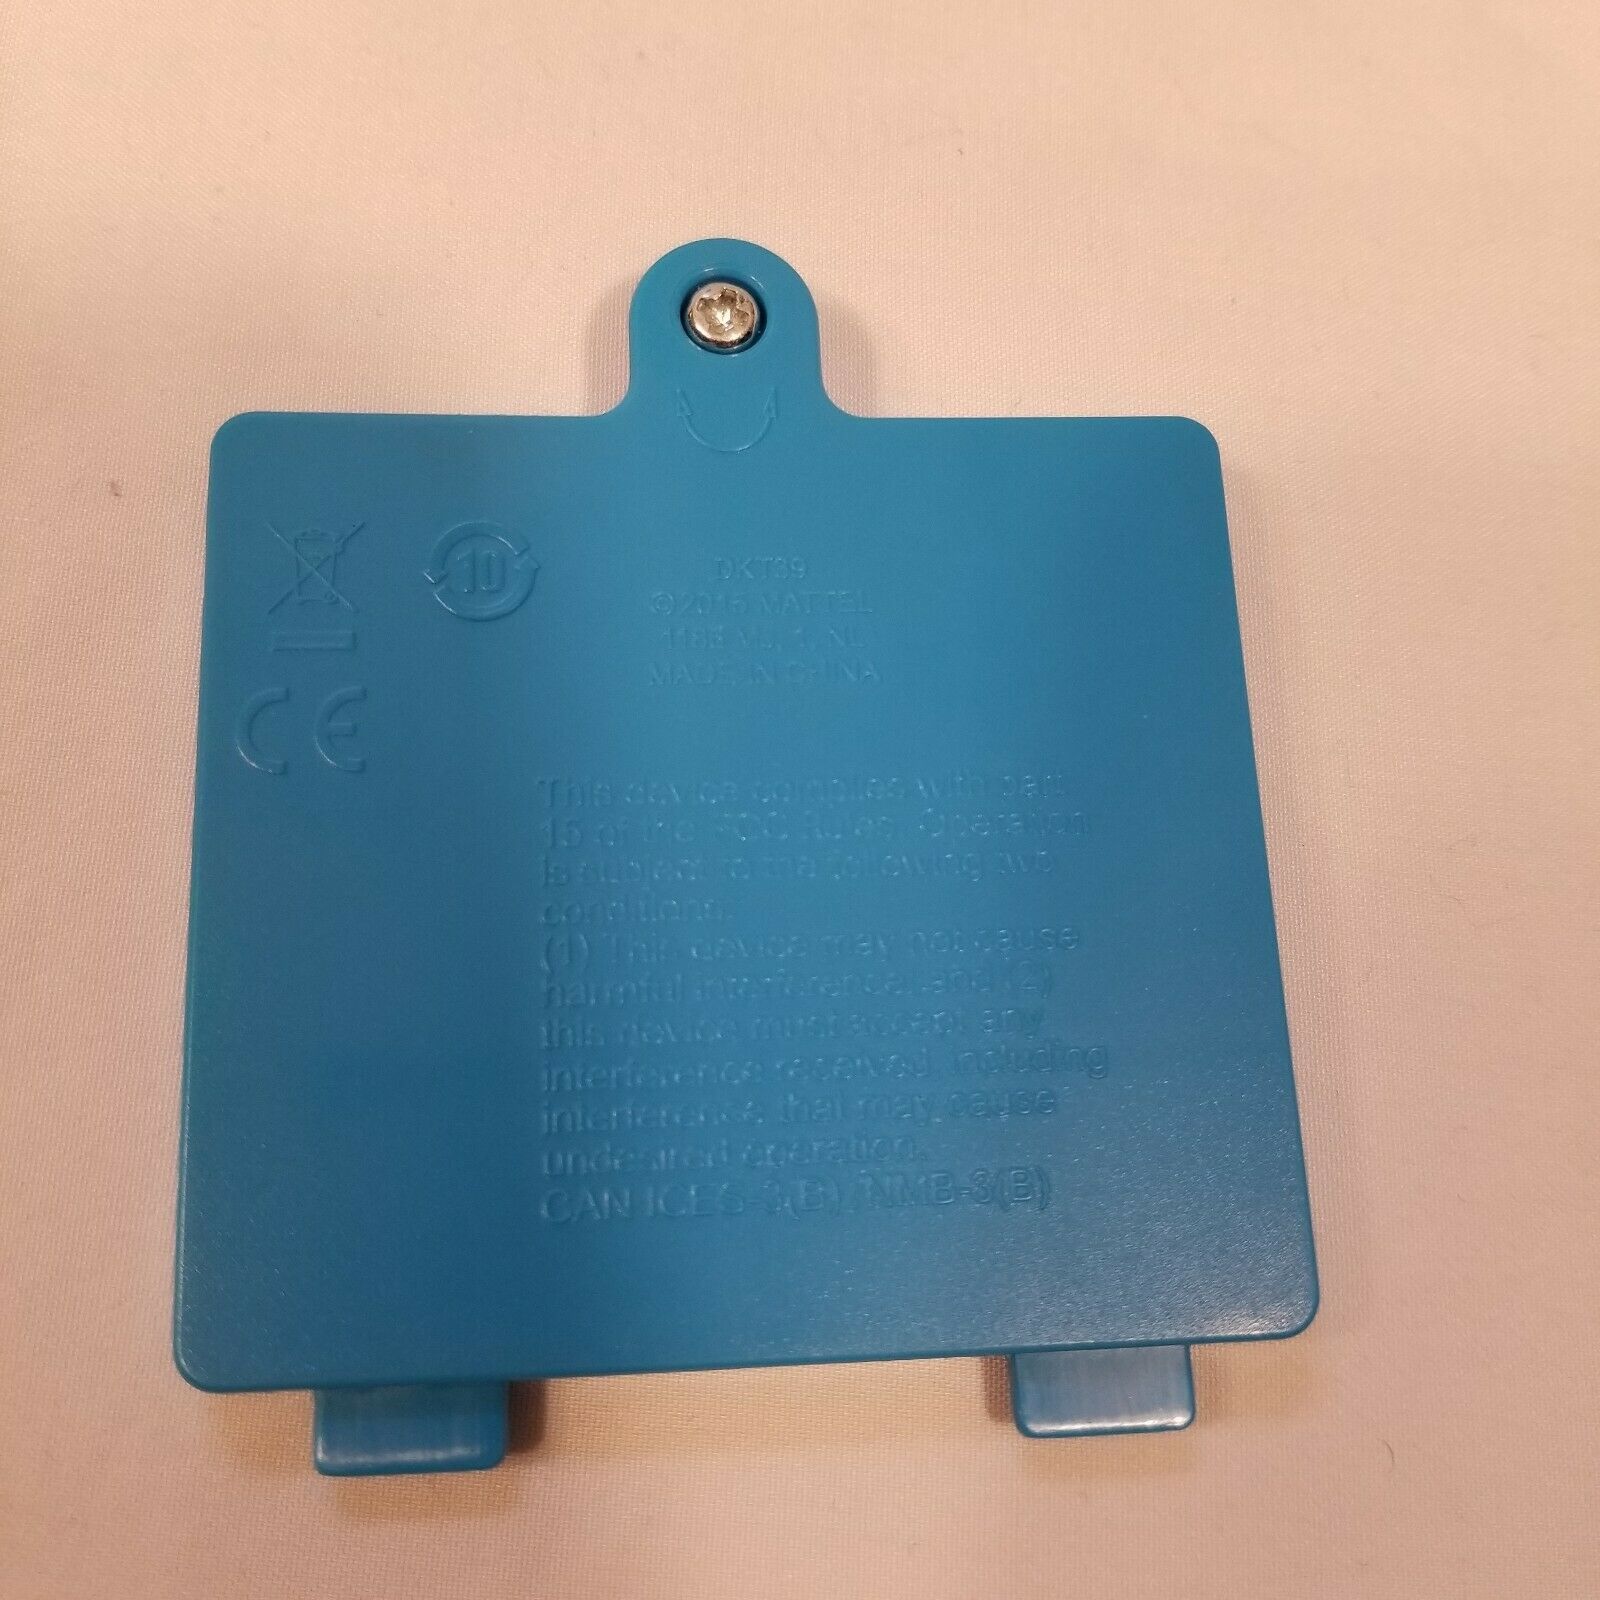 Primary image for Fisher Price Original Think & Learn Code-A-Pillar Replacement Battery Door